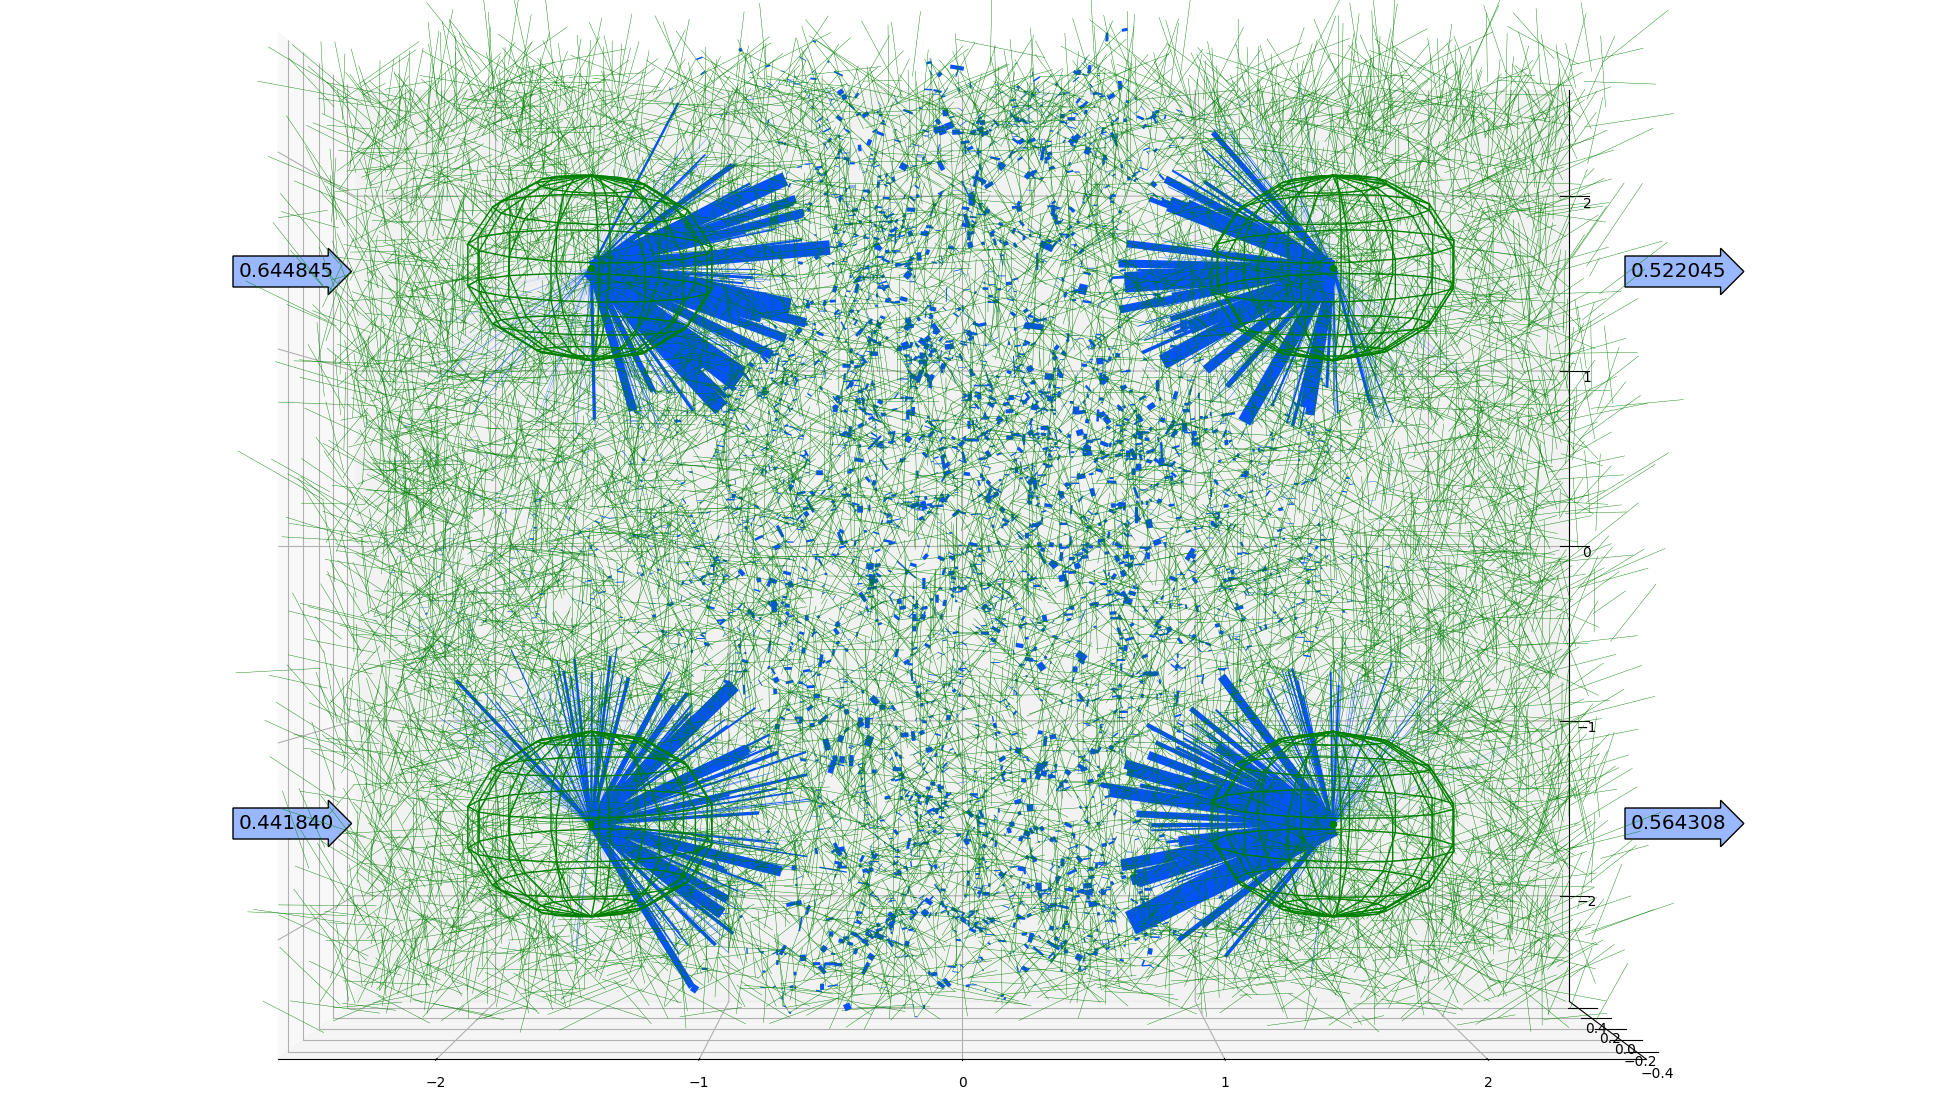 Visualization from resistor network simulation